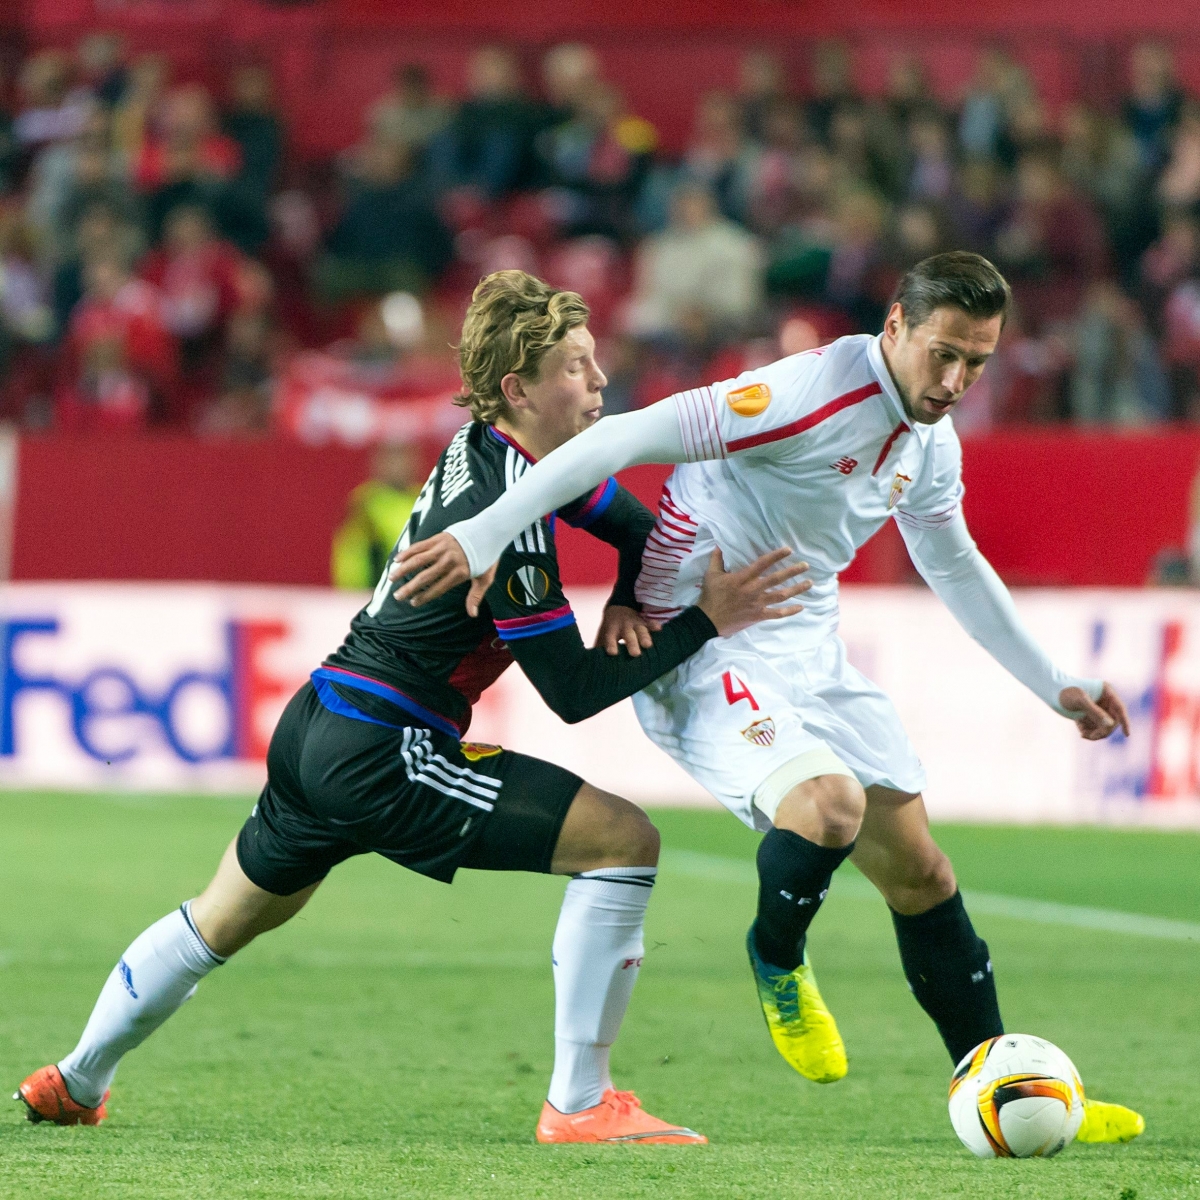 Basel's Alexander Fransson, left, fights for the ball against Sevilla's Grzegorz Krychowiak, right, during the UEFA Europa League Round of 16 second leg soccer match between Spain's Sevilla Futbol Club and Switzerland's FC Basel 1893 at the Ramon Sanchez Pizjuan stadium in Sevilla, Spain, on Thursday, March 17, 2016. (KEYSTONE/Georgios Kefalas) SPAIN SOCCER EUROPA LEAGUE SEVILLA BASEL